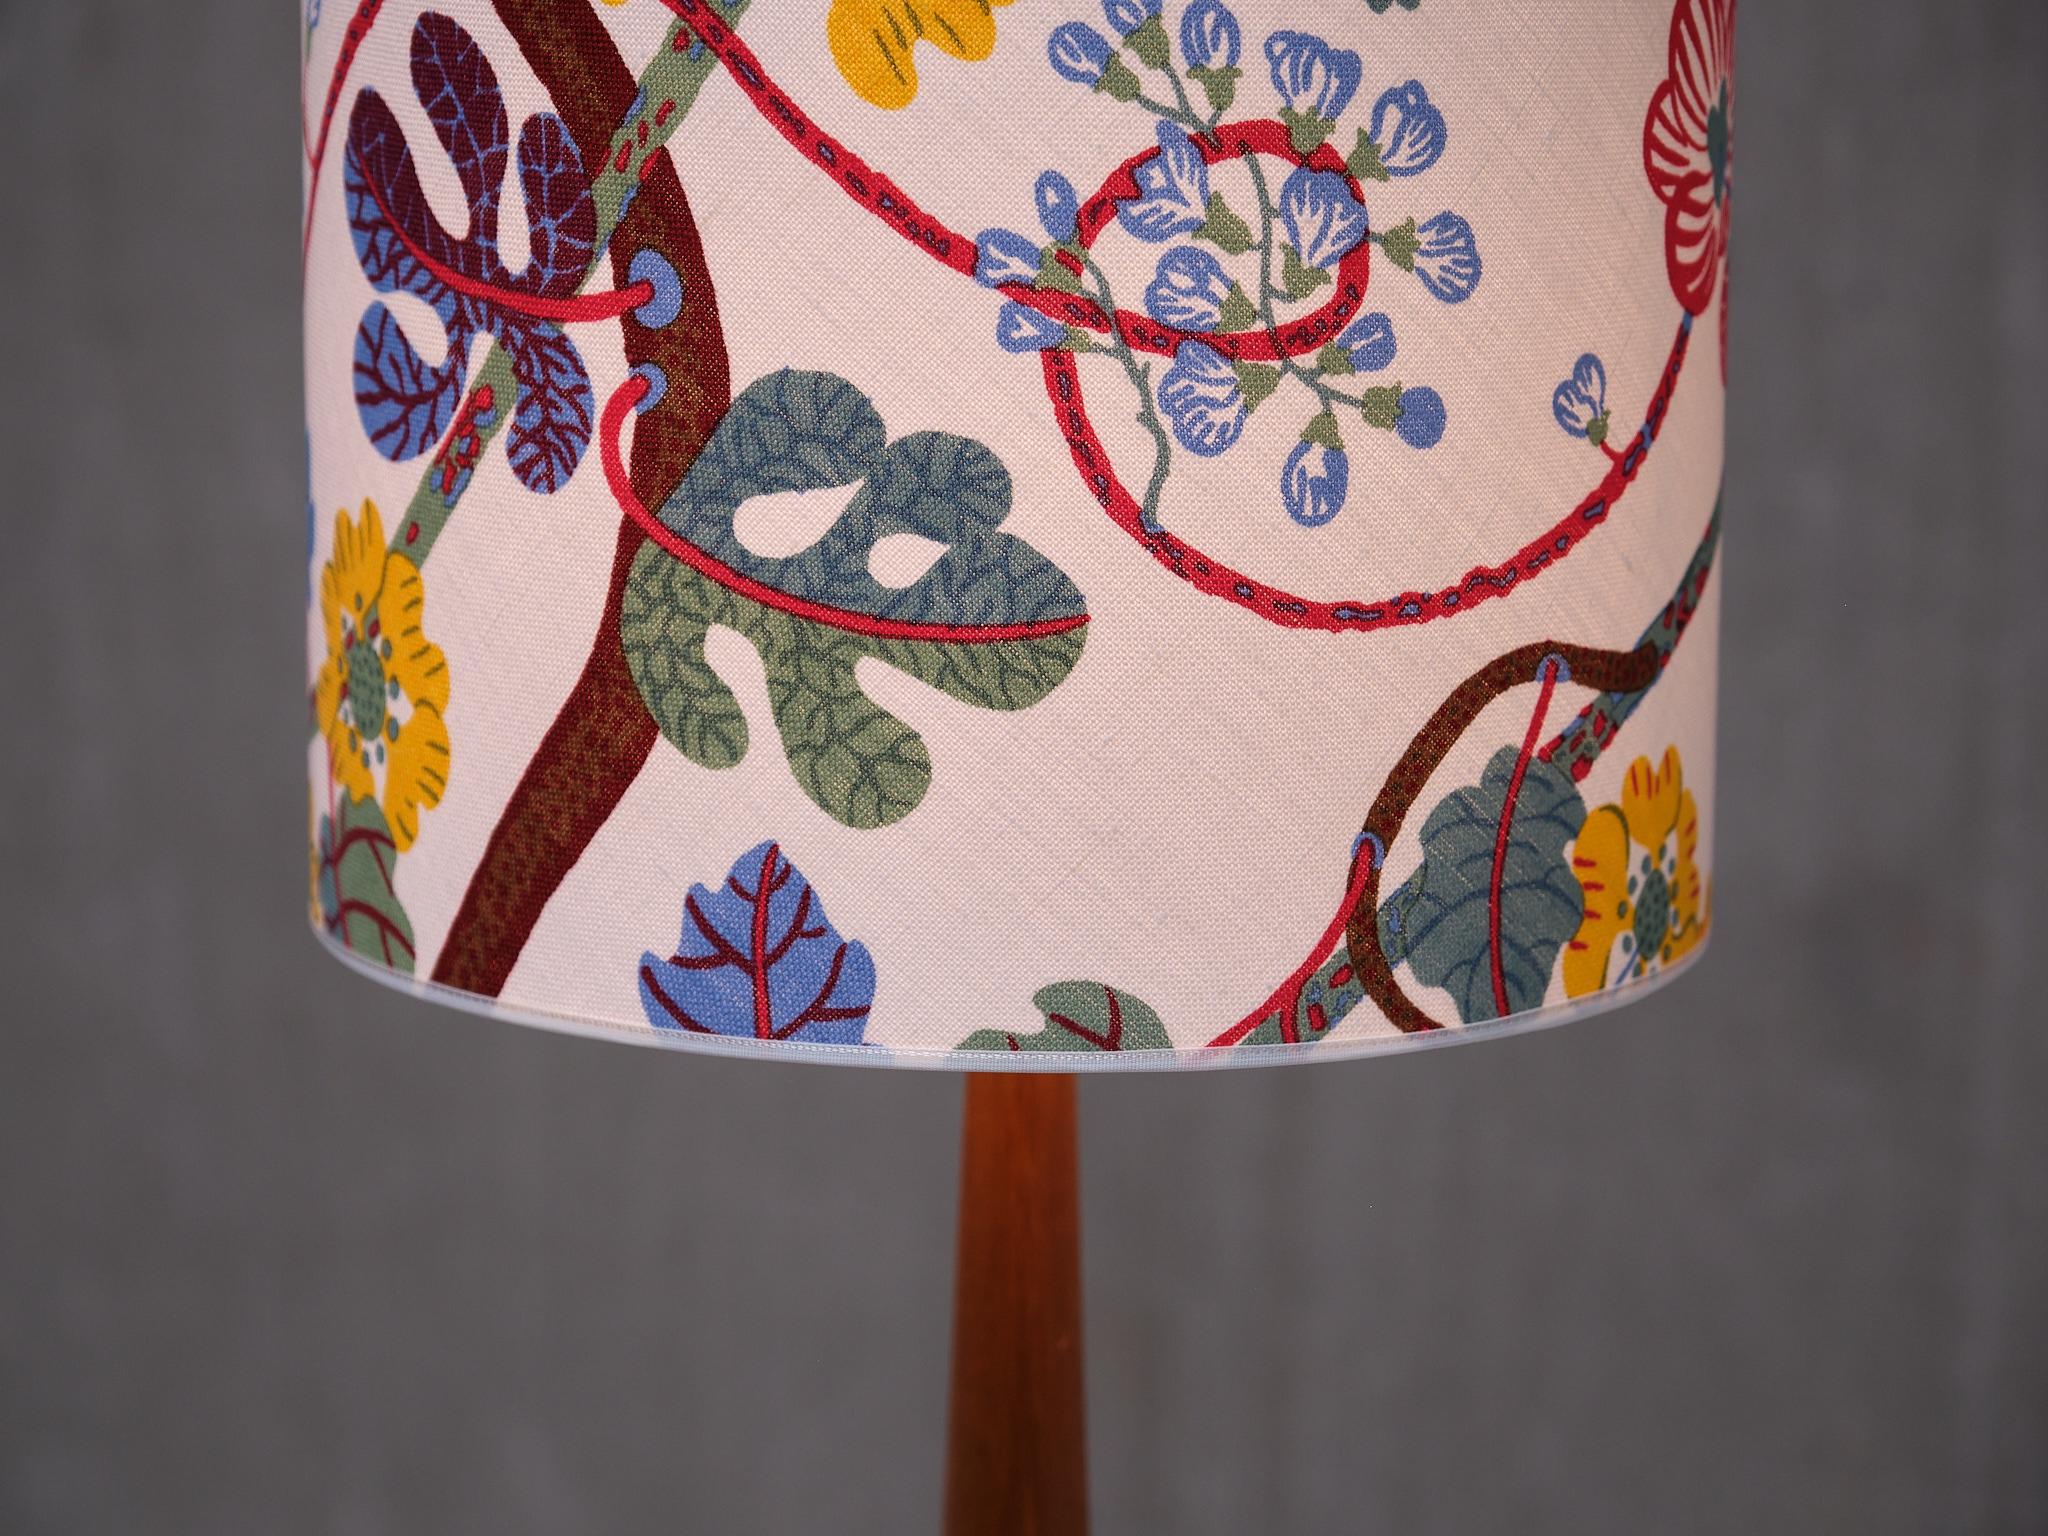 Pair of Stilarmatur Tranås Table Lamps with Josef Frank Shades, Sweden, 1960s For Sale 2